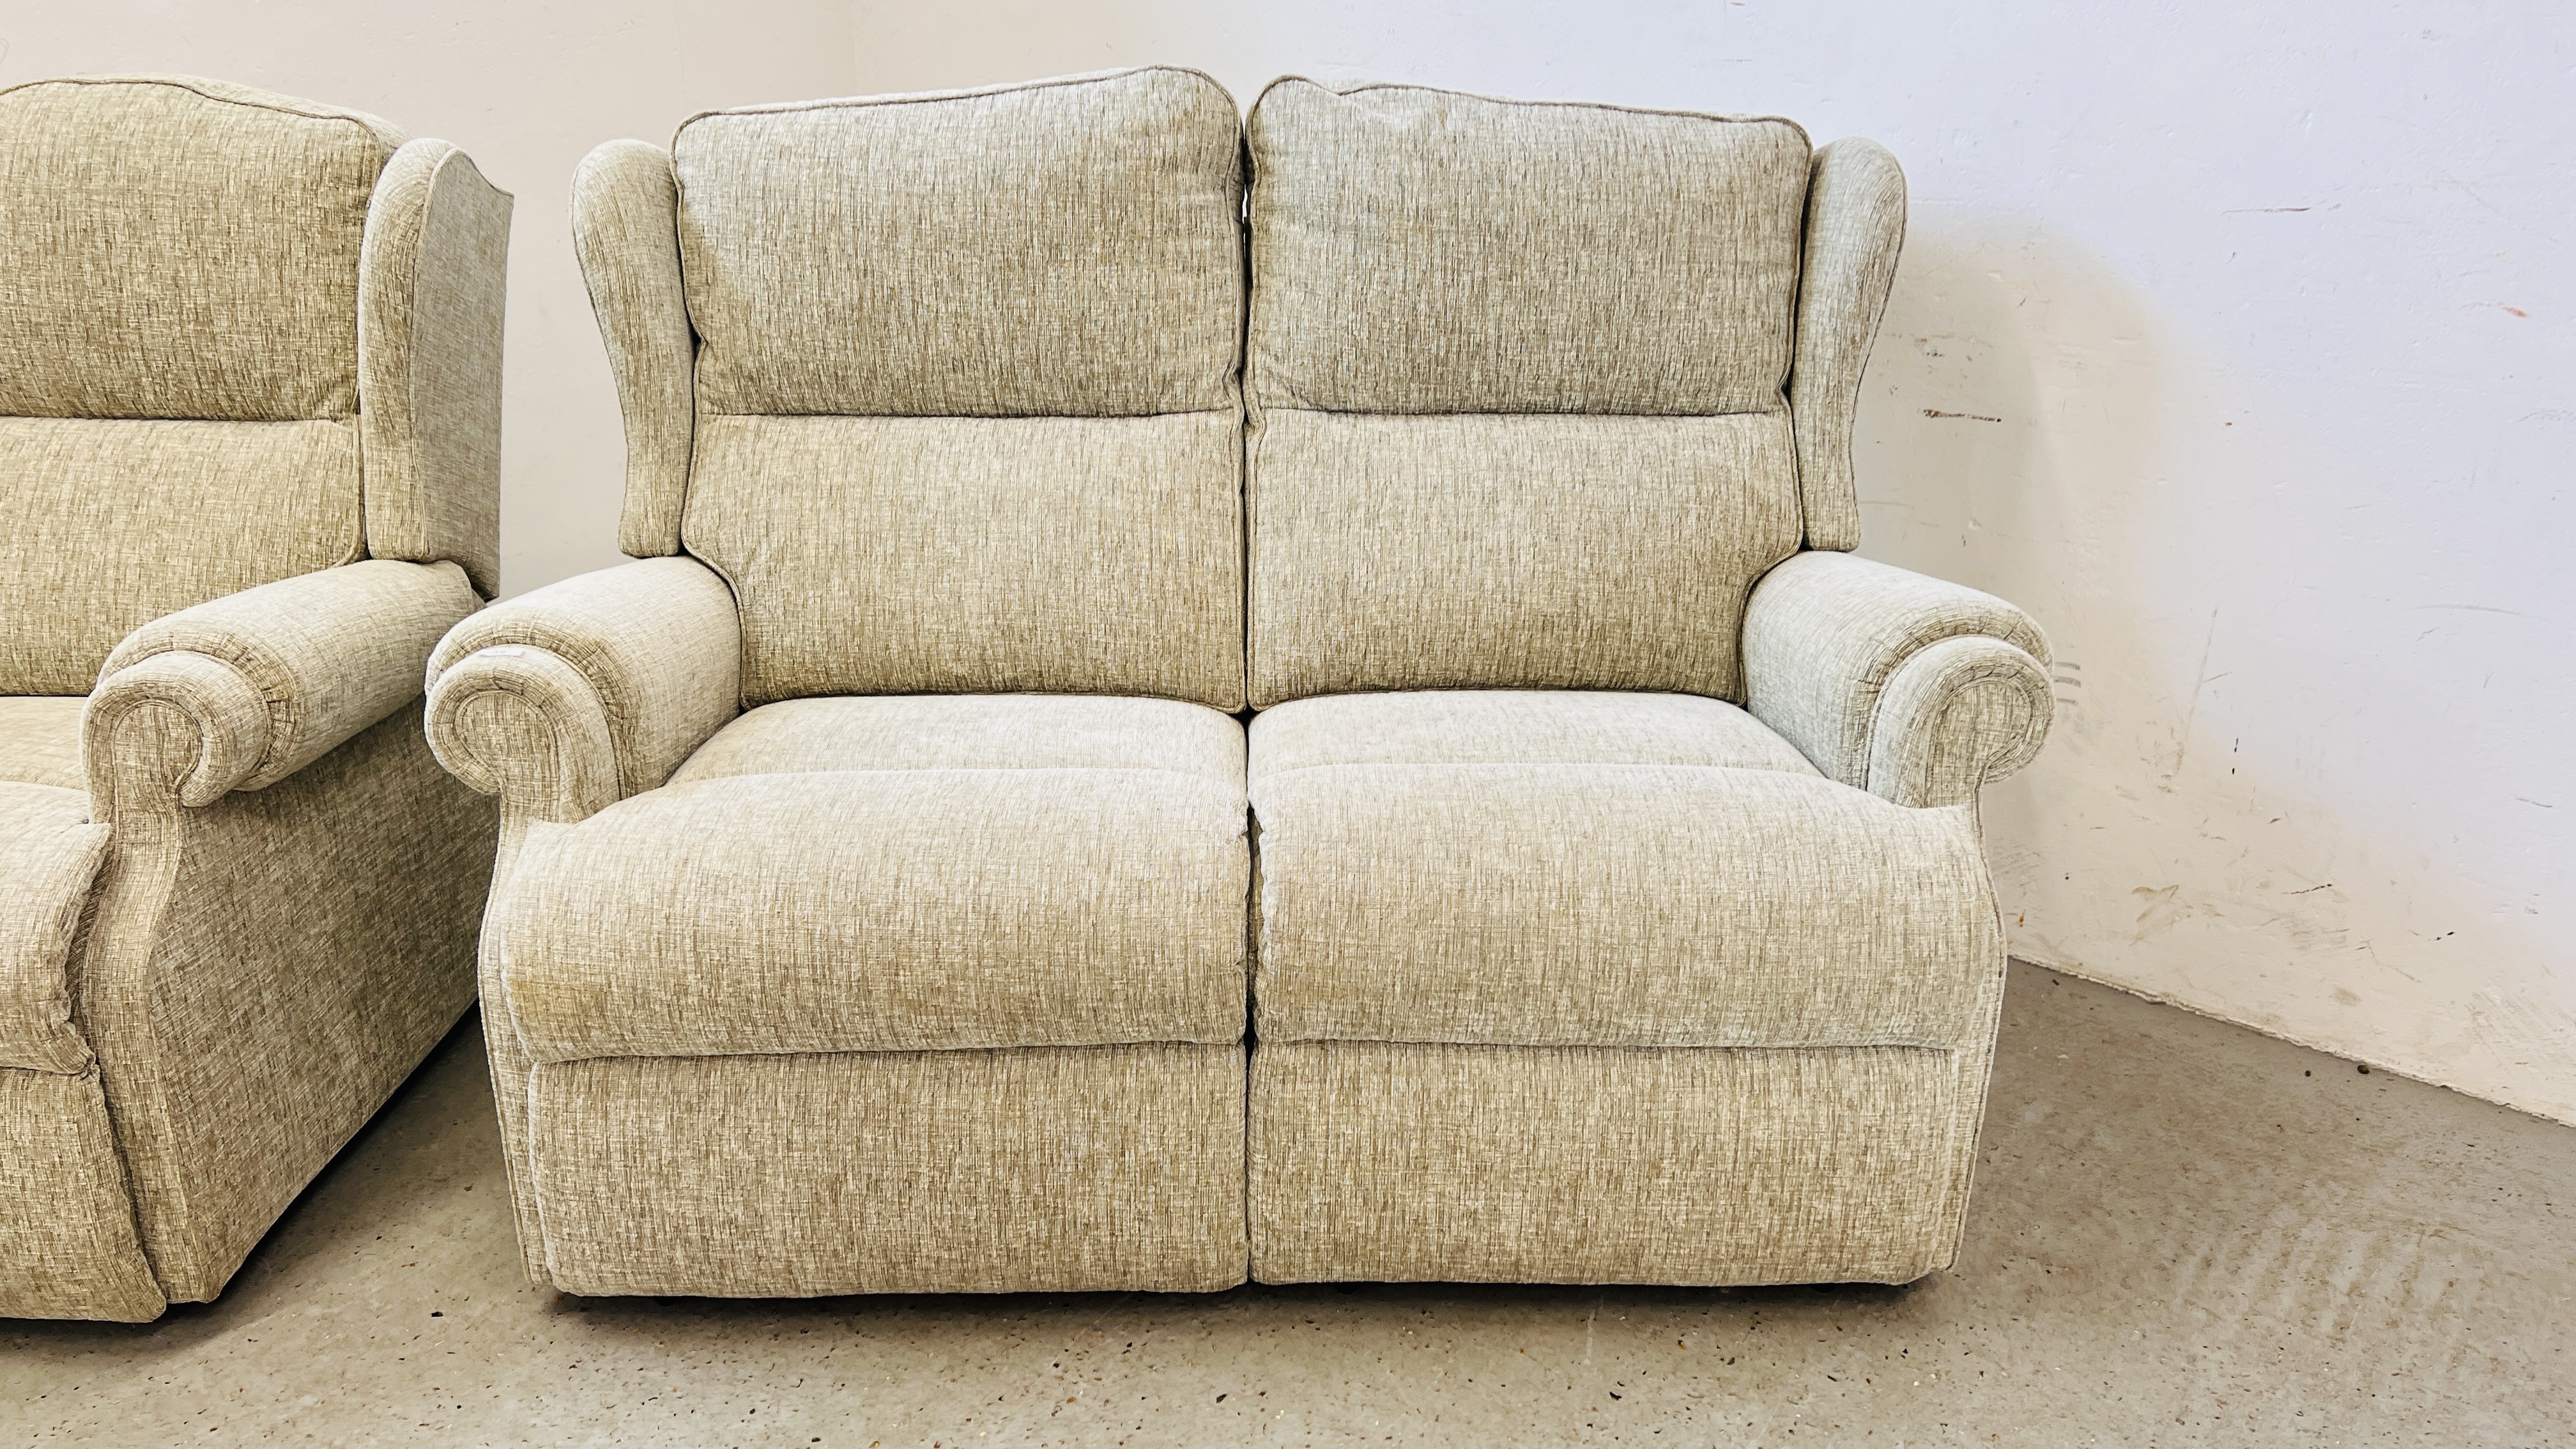 A GOOD QUALITY "SHERBORNE" TWO SEATER SOFA W 140CM X D 82CM X H 94CM ALONG WITH A MATCHING ARMCHAIR. - Image 2 of 14